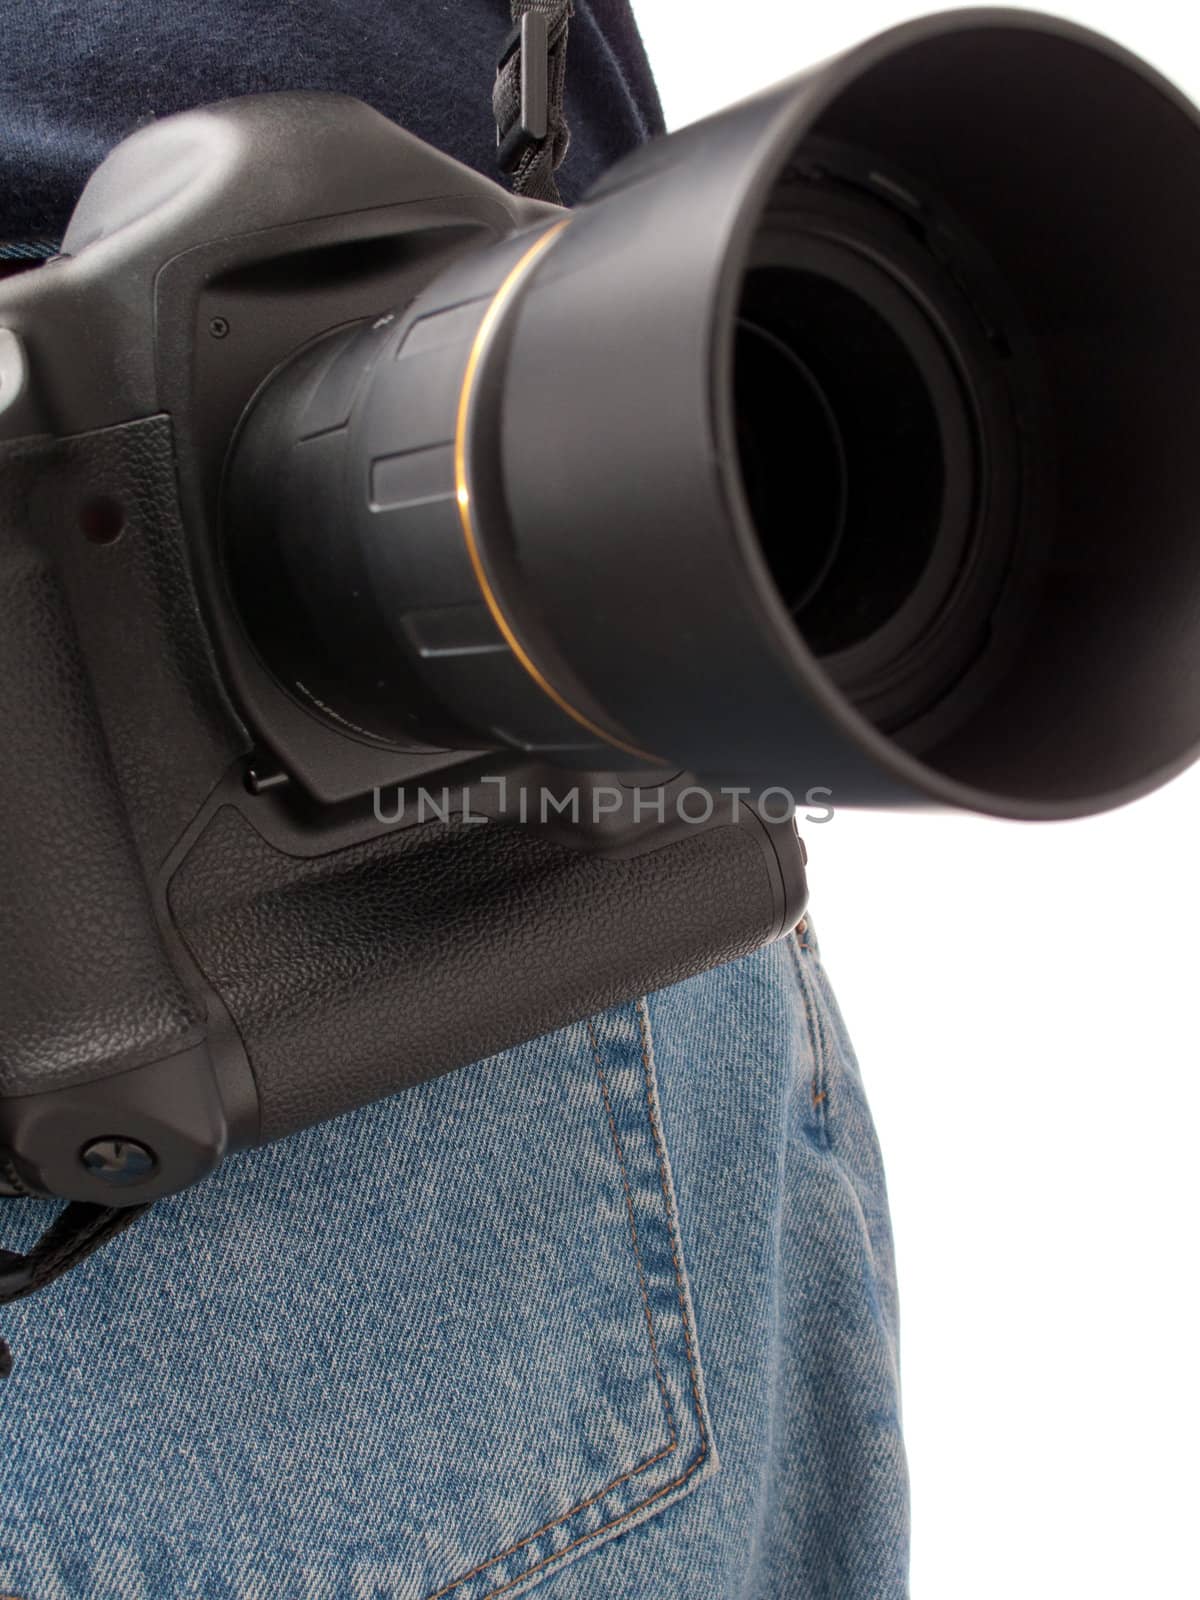 Focus on a digital SLR camera with lens and hood connected, hanging off the back, with the back pocket of denim jeans visible, isolated on white.